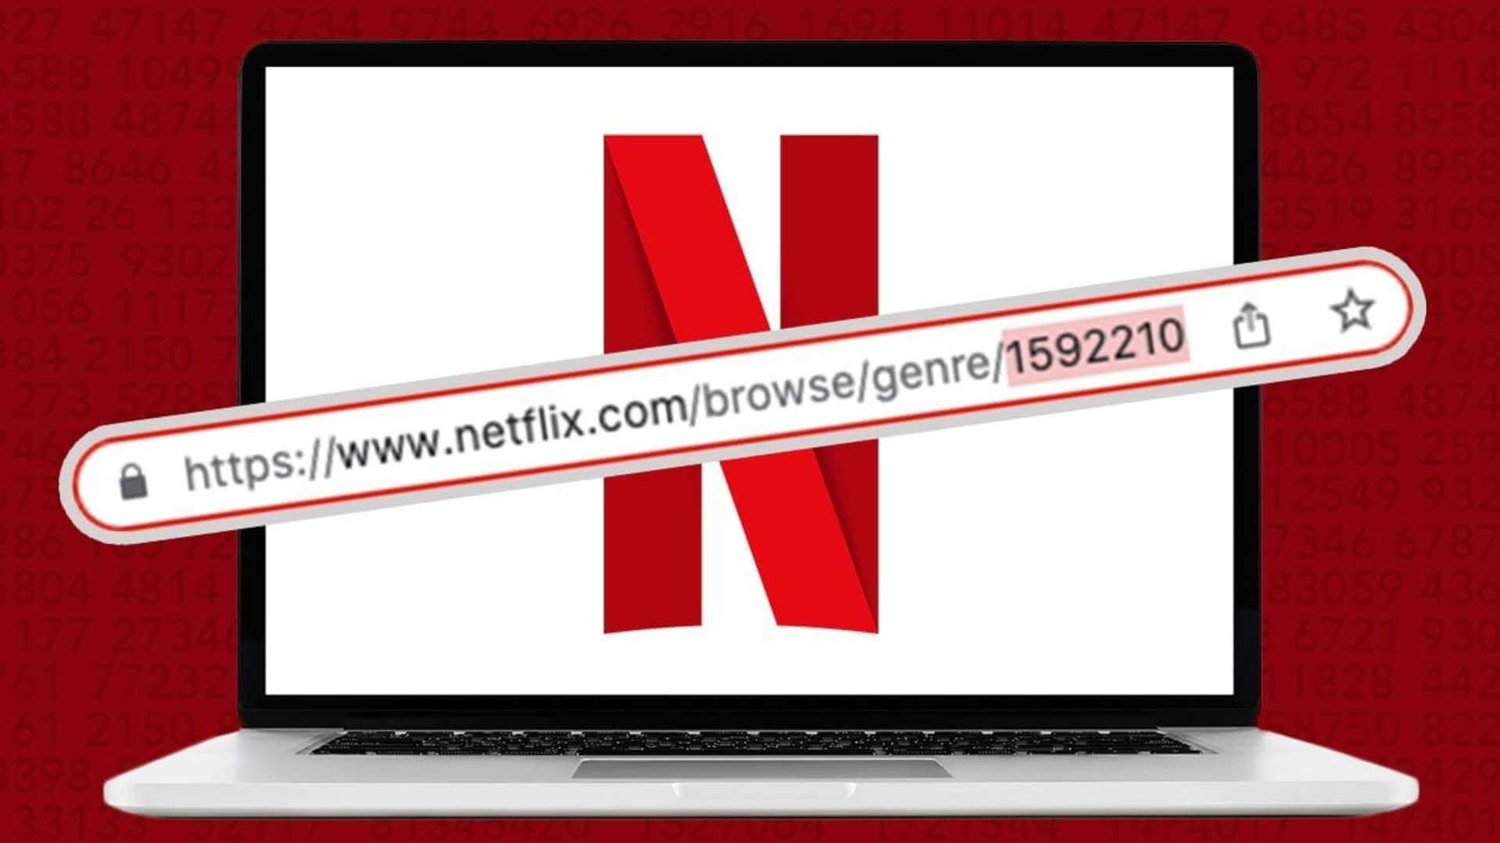 How to Use Netflix Codes